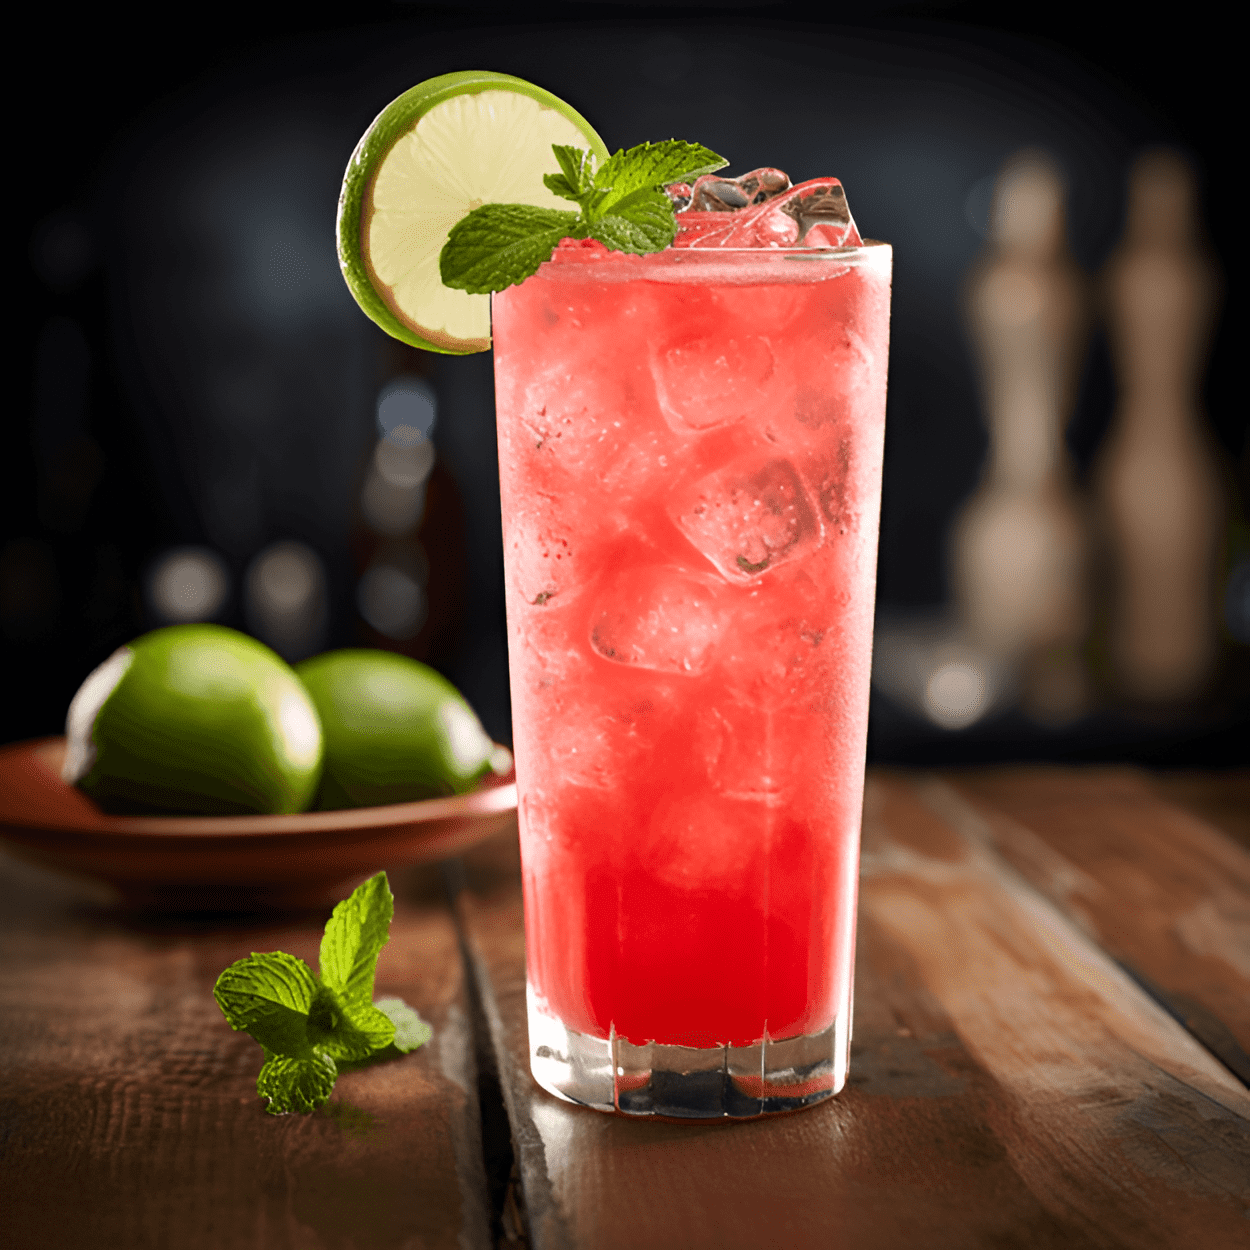 Watermelon Pucker Cocktail Recipe - The Watermelon Pucker is a sweet and fruity cocktail, with a strong watermelon flavor. It's also slightly tart, thanks to the addition of lime juice, and has a refreshing, light finish.